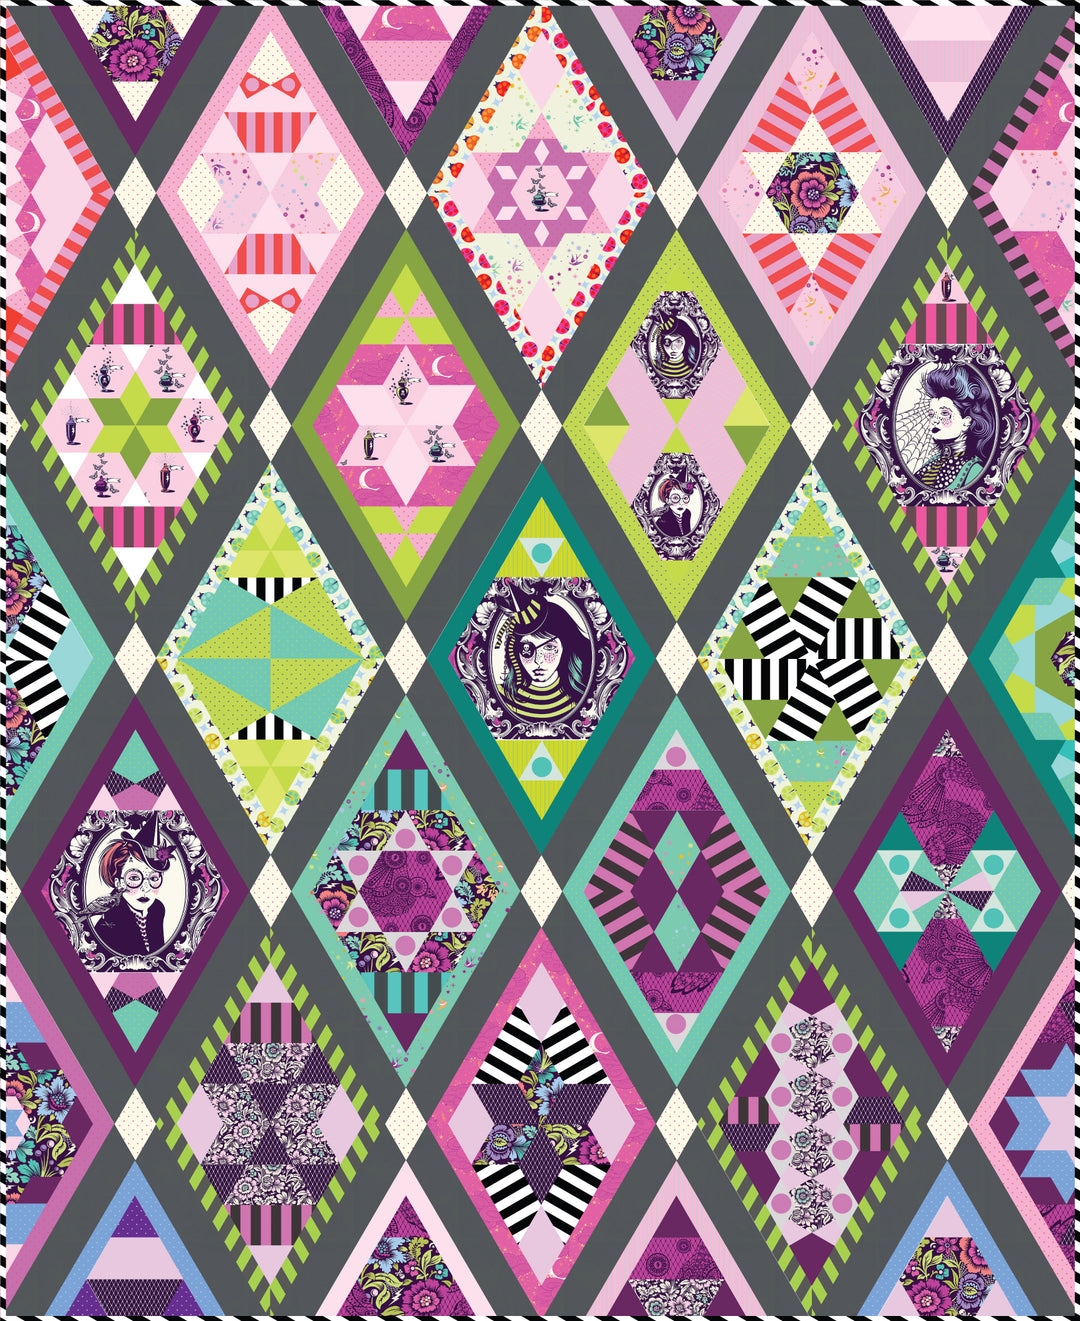 PREORDER - Queen of Diamonds - The Night Queen - Quilt Kit - Fabric Only - QODNIGHT-KIT